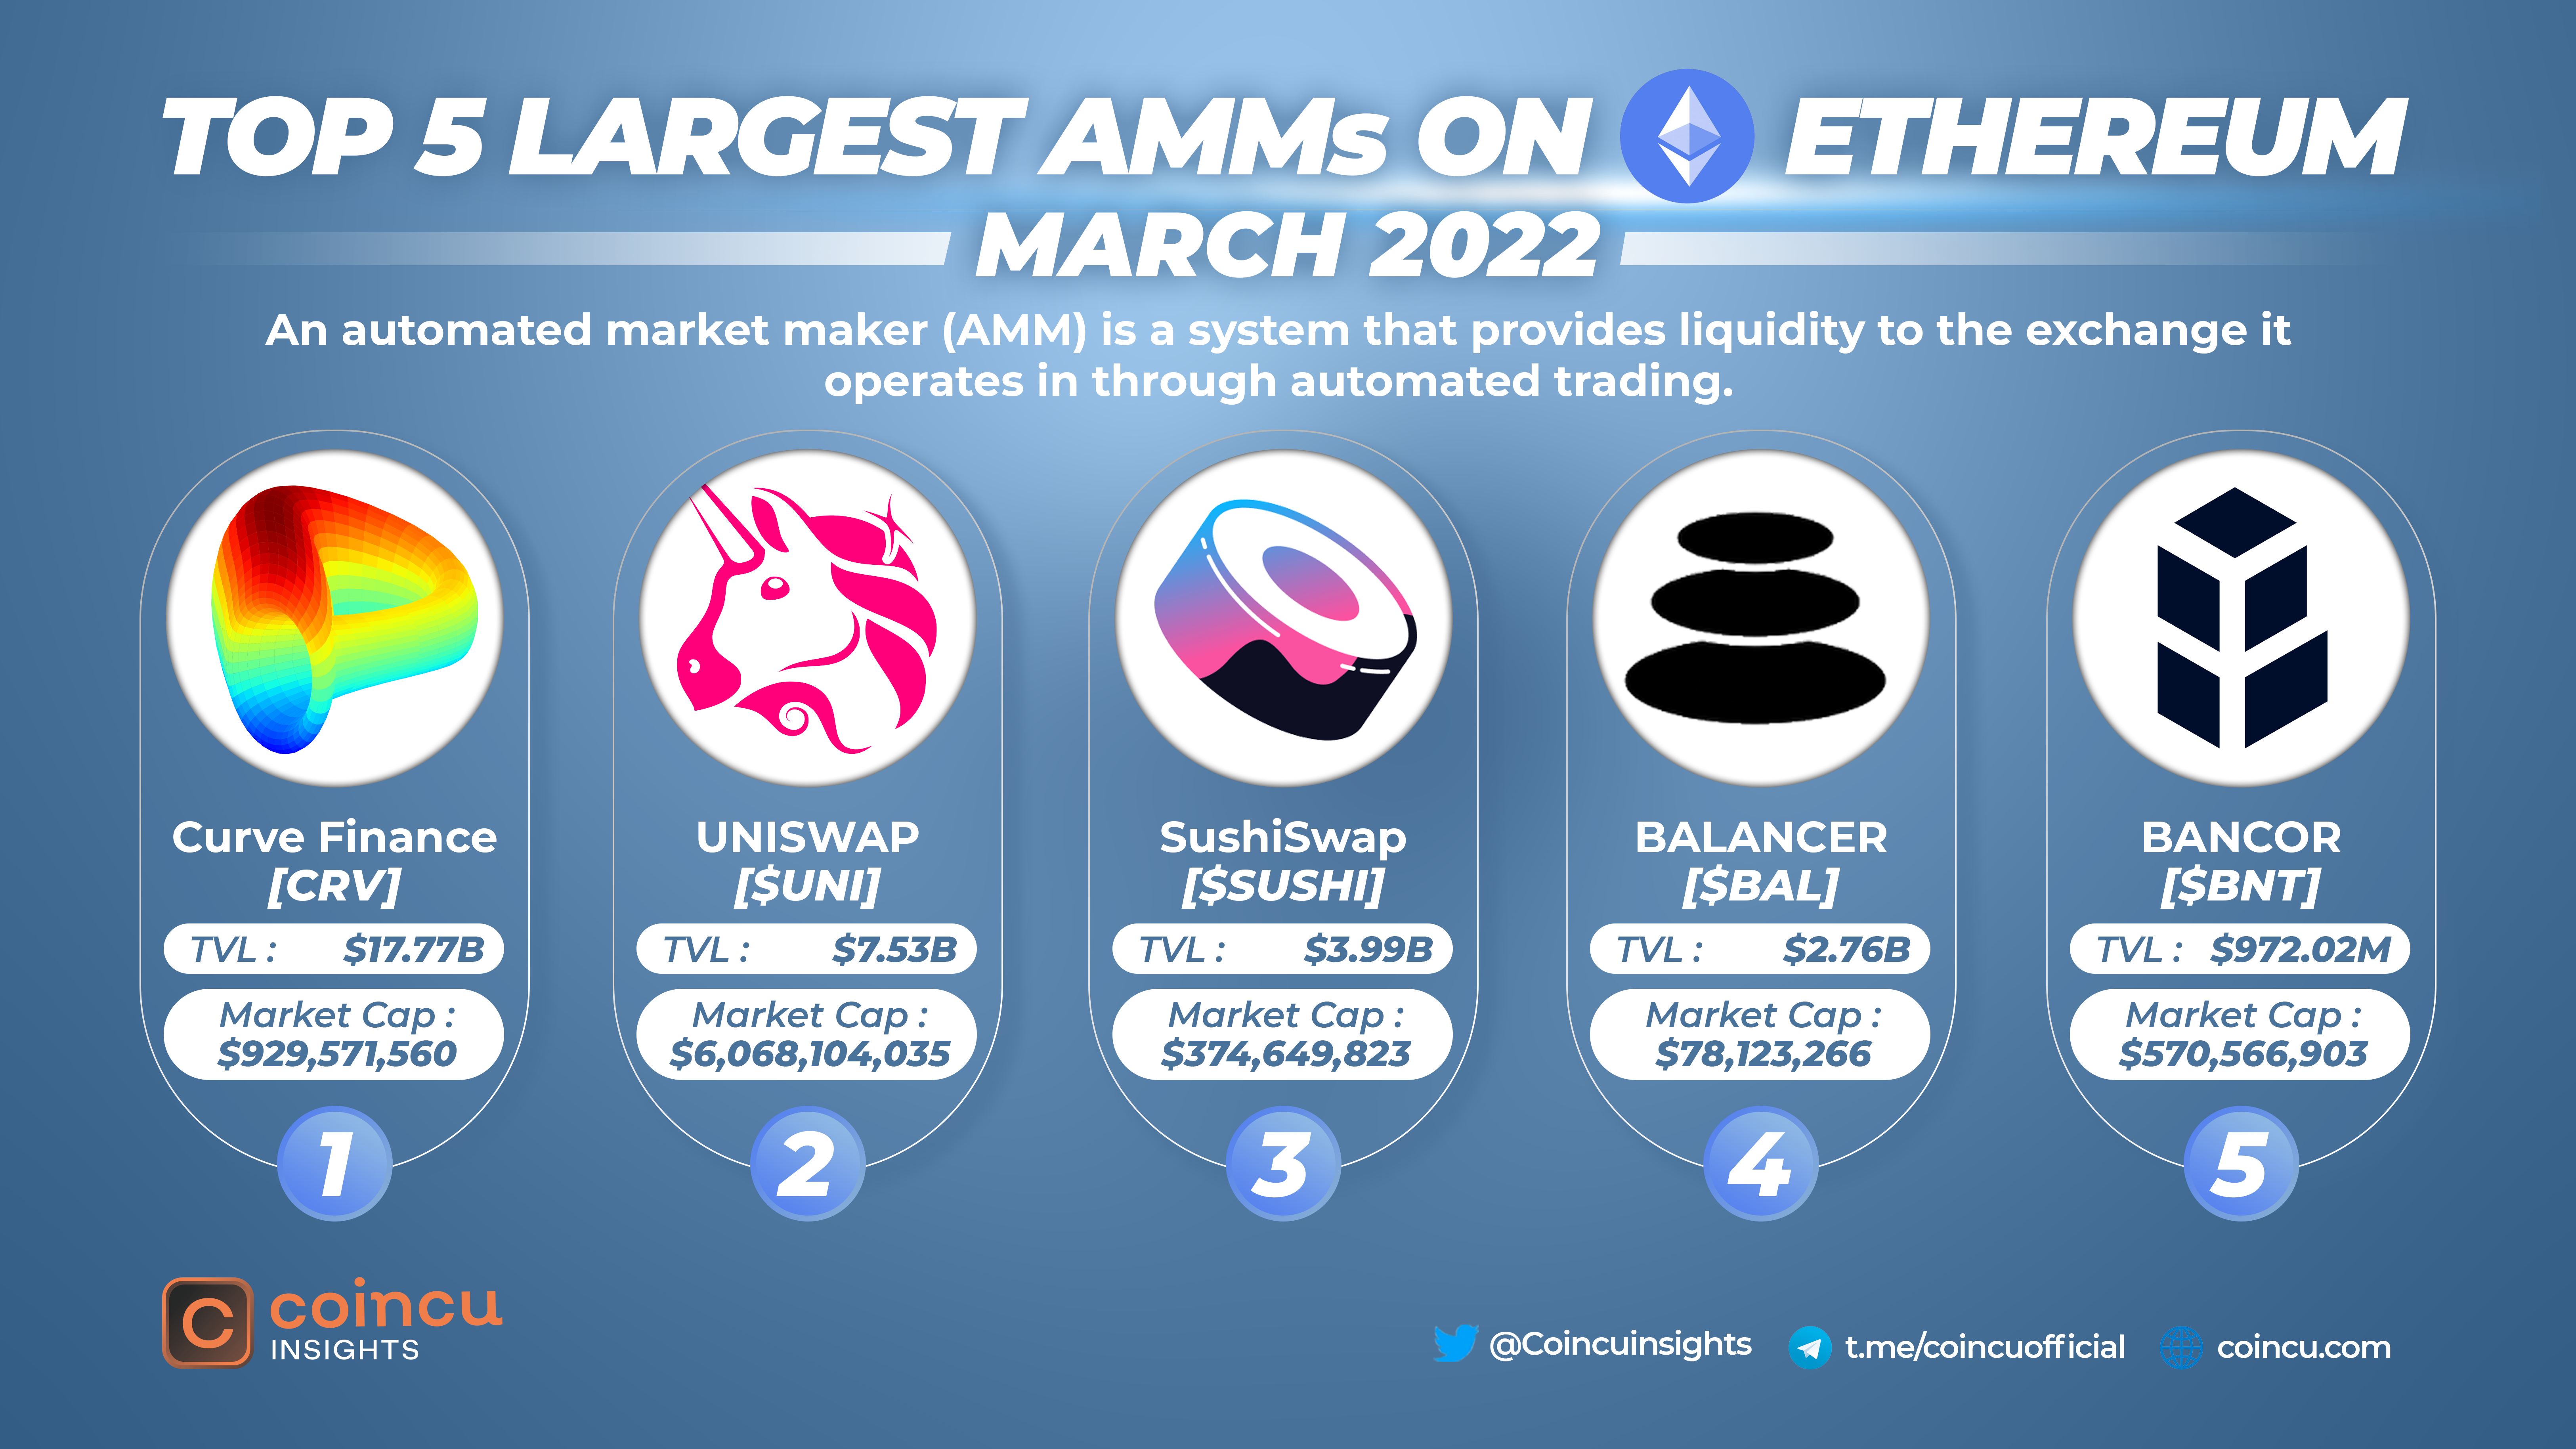 Top 5 Largest AMMs On Ethereum